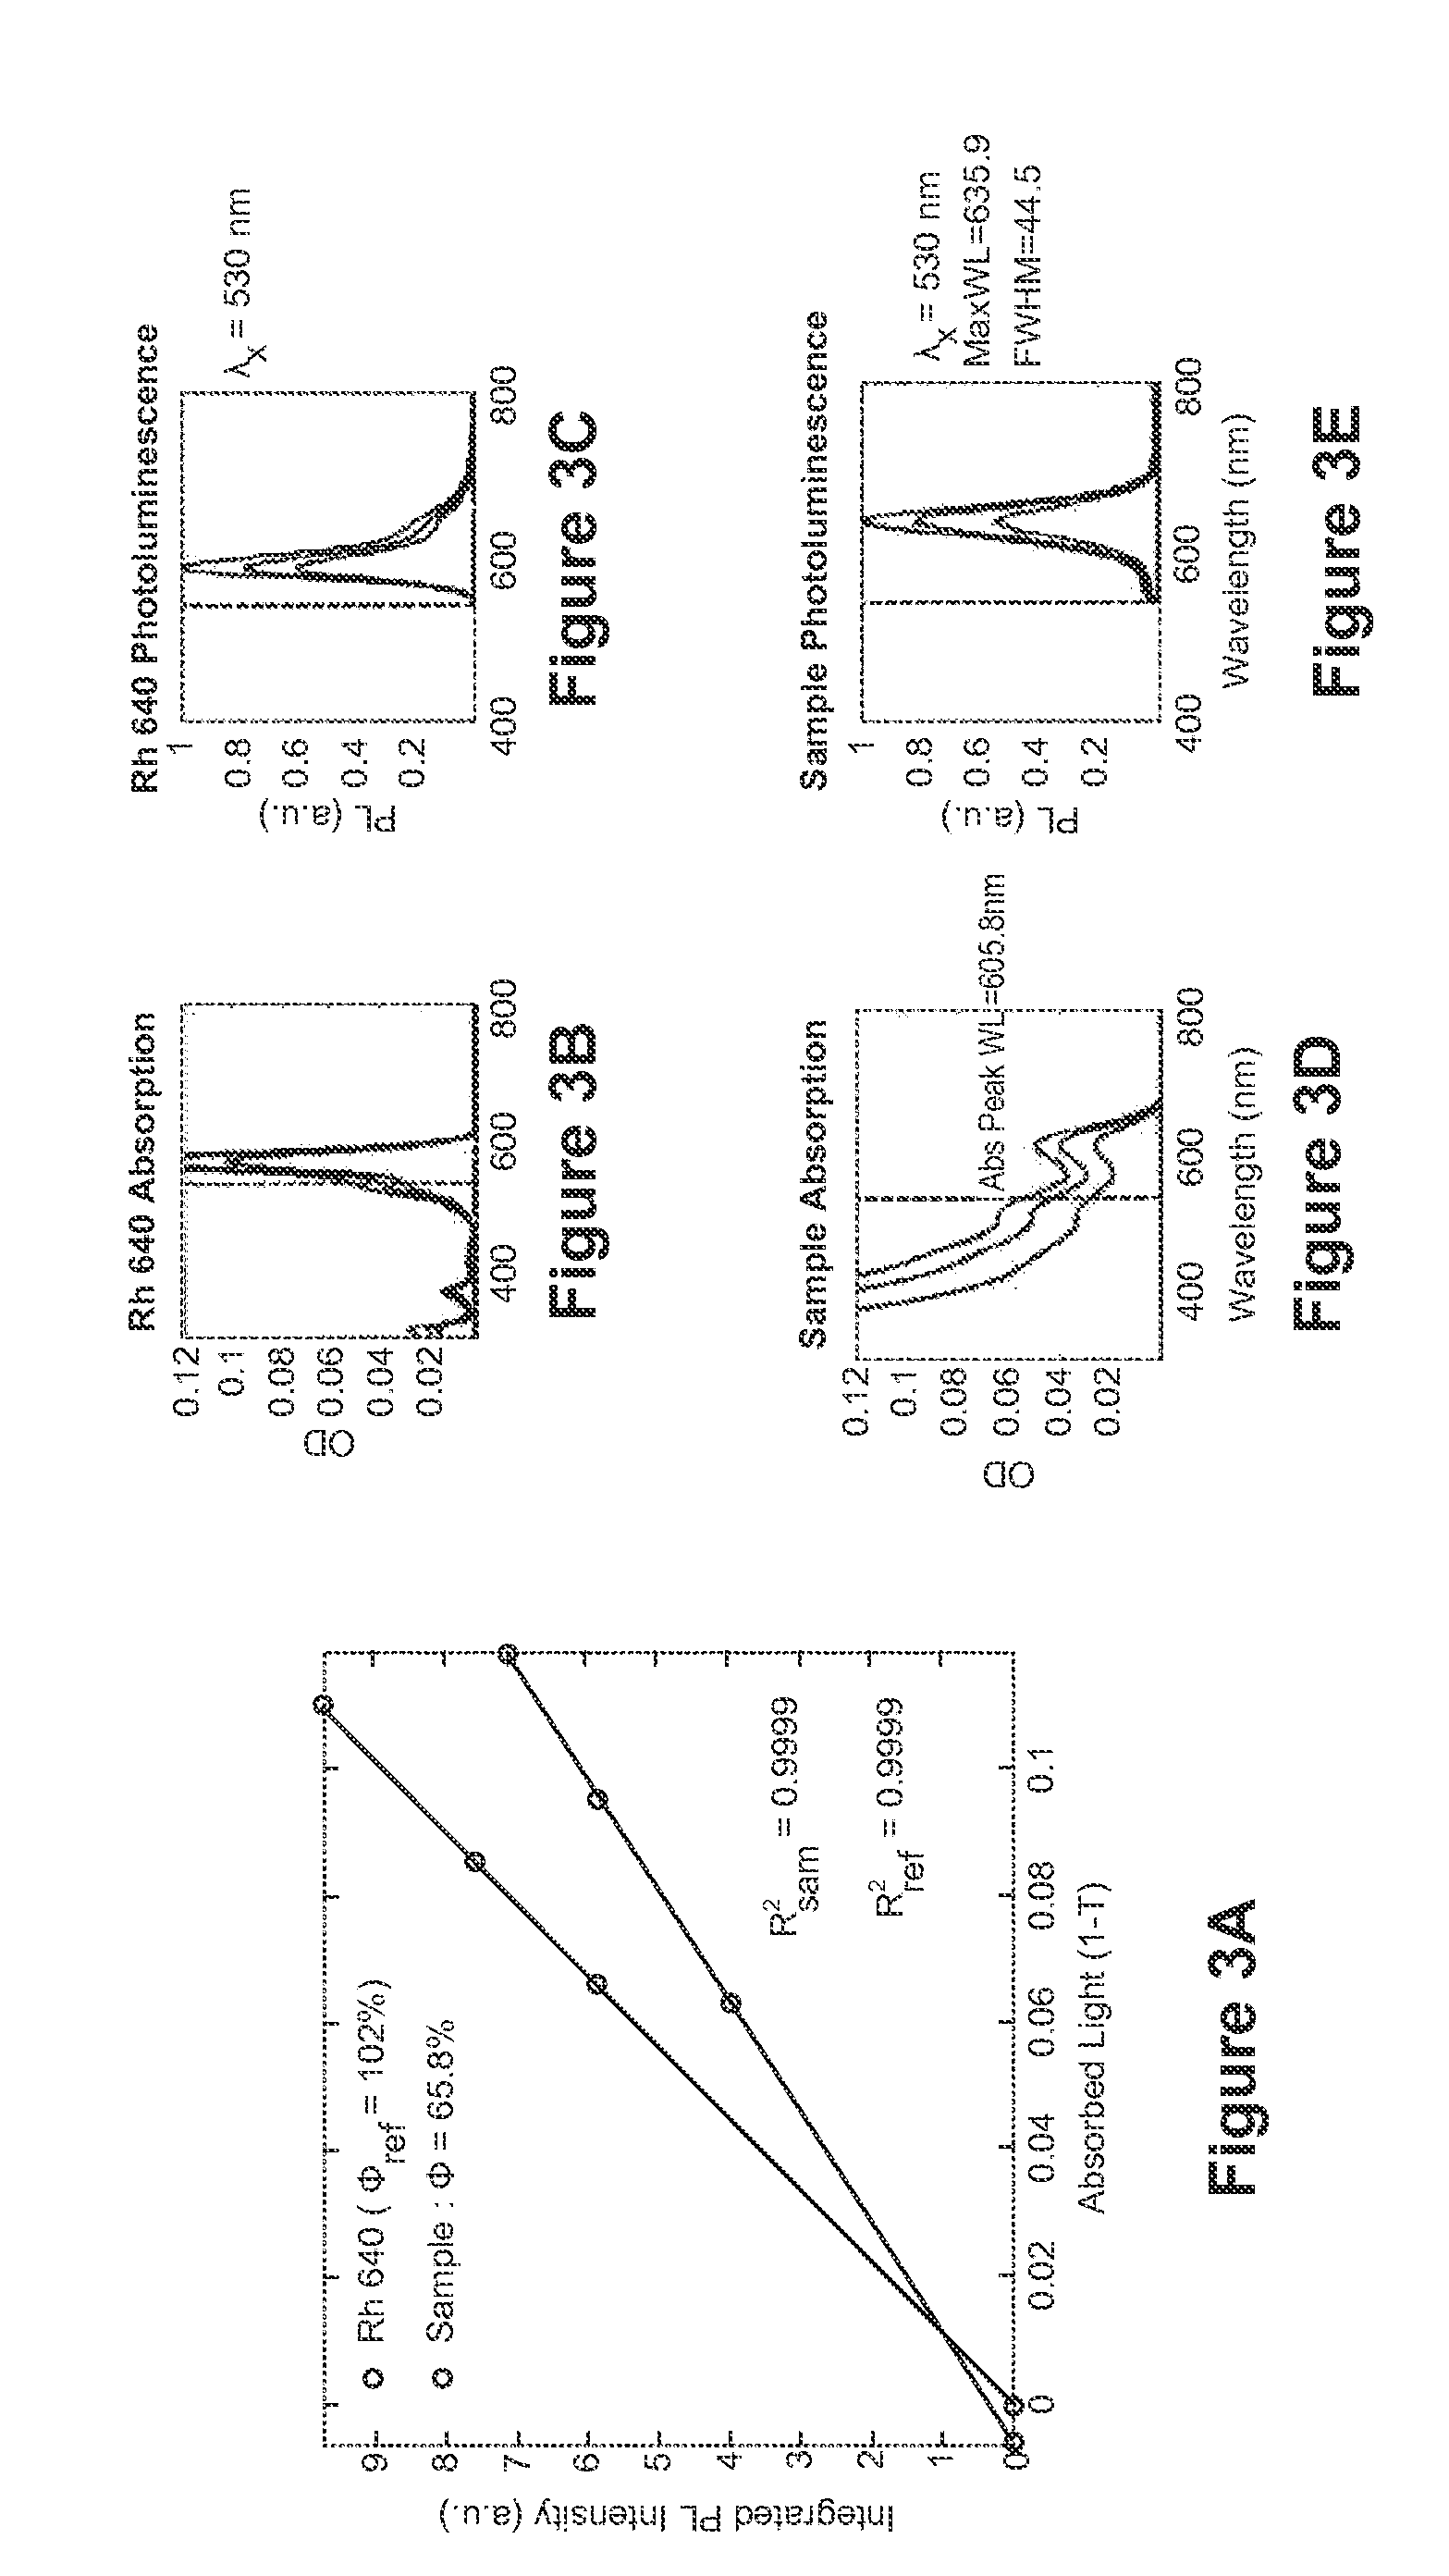 Highly luminescent nanostructures and methods of producing same